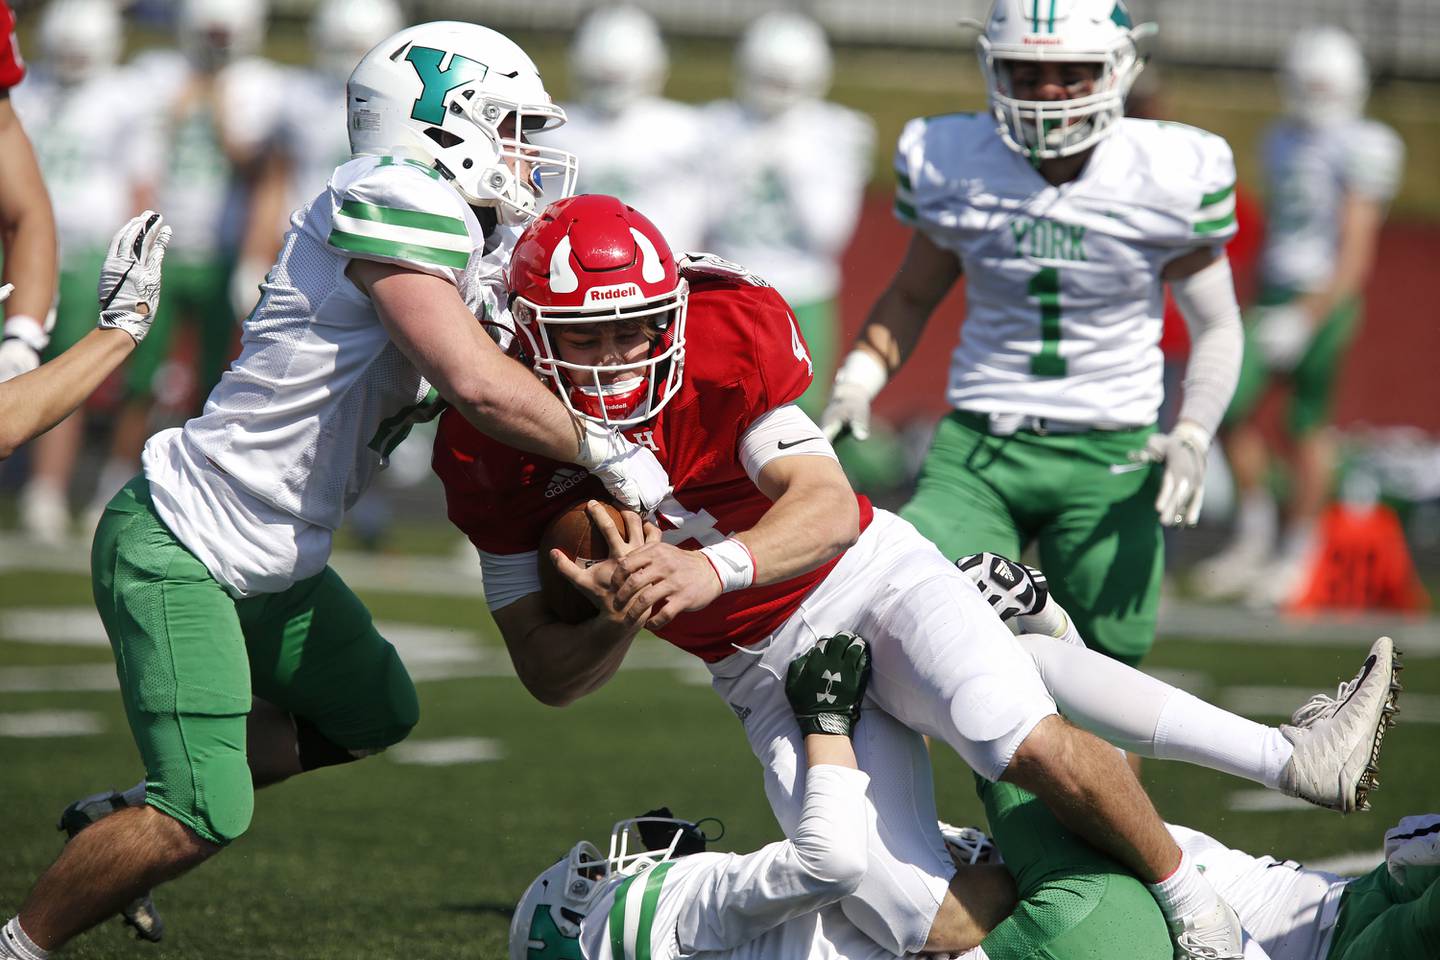 York’s Jeff Coglianese (left) and Everett Snyder (bottom) tackle Hinsdale Central’s Michael Brescia during their football game at Hinsdale Central High School in Hinsdale, Ill., on Saturday, April 3, 2021.